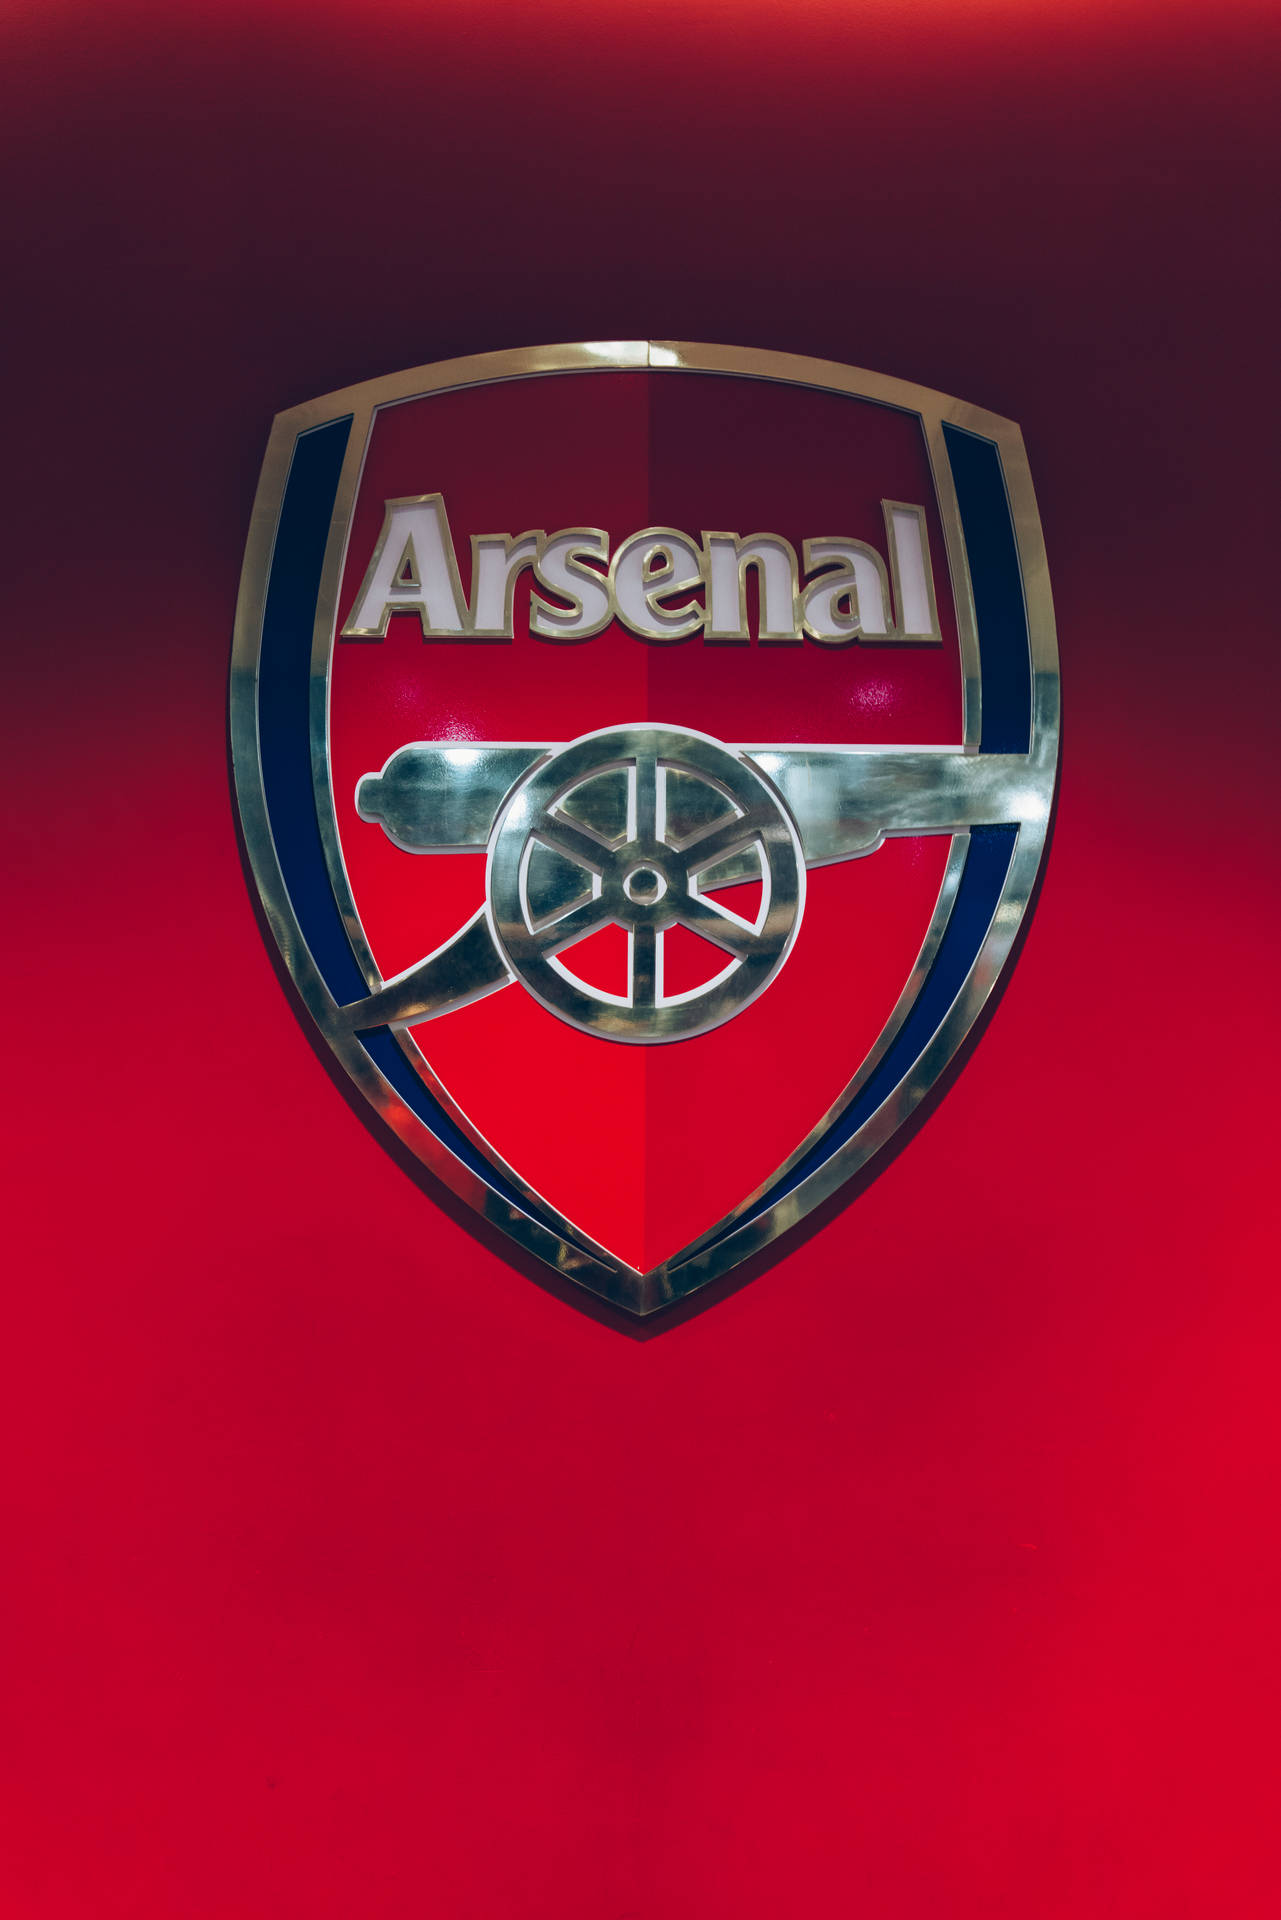 Arsenal 5304X7952 Wallpaper and Background Image